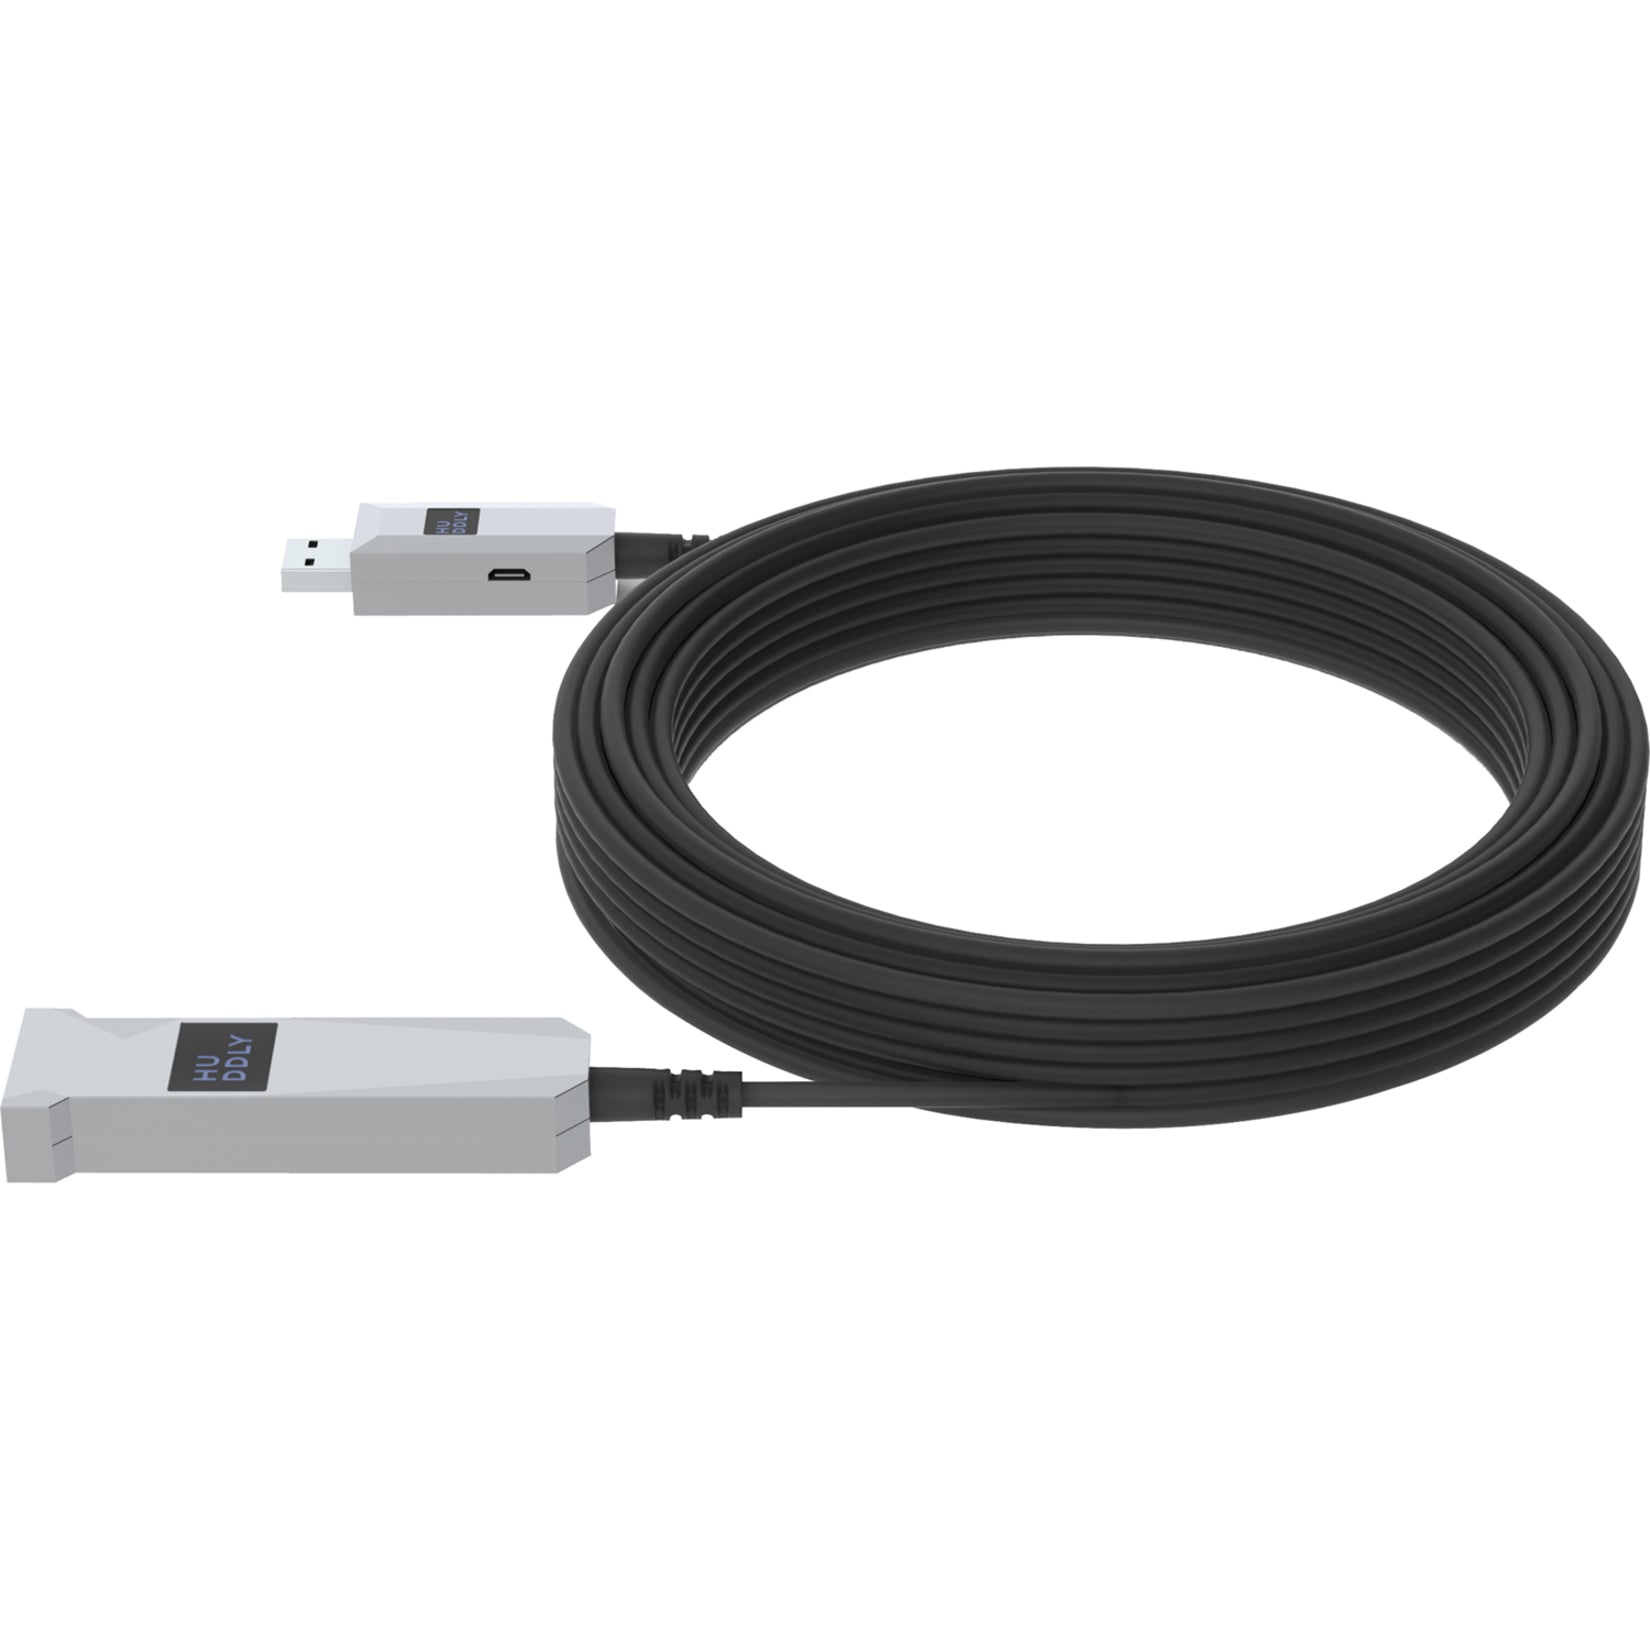 Huddly 7090043790443 USB AOC Data Transfer Cable, 16.40 ft Extension Cable